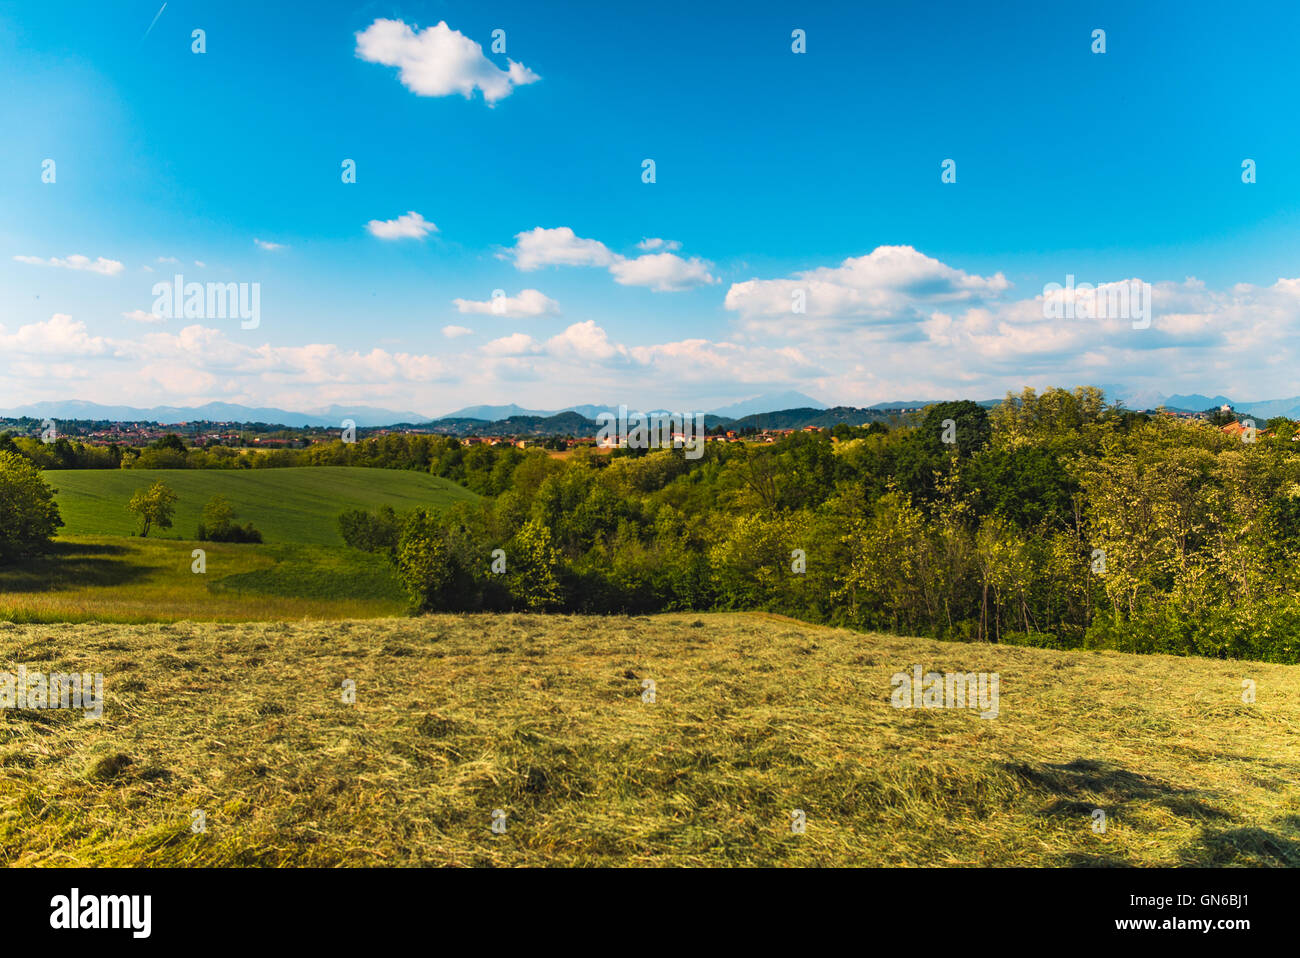 Countryside and hills in a sunny day Stock Photo